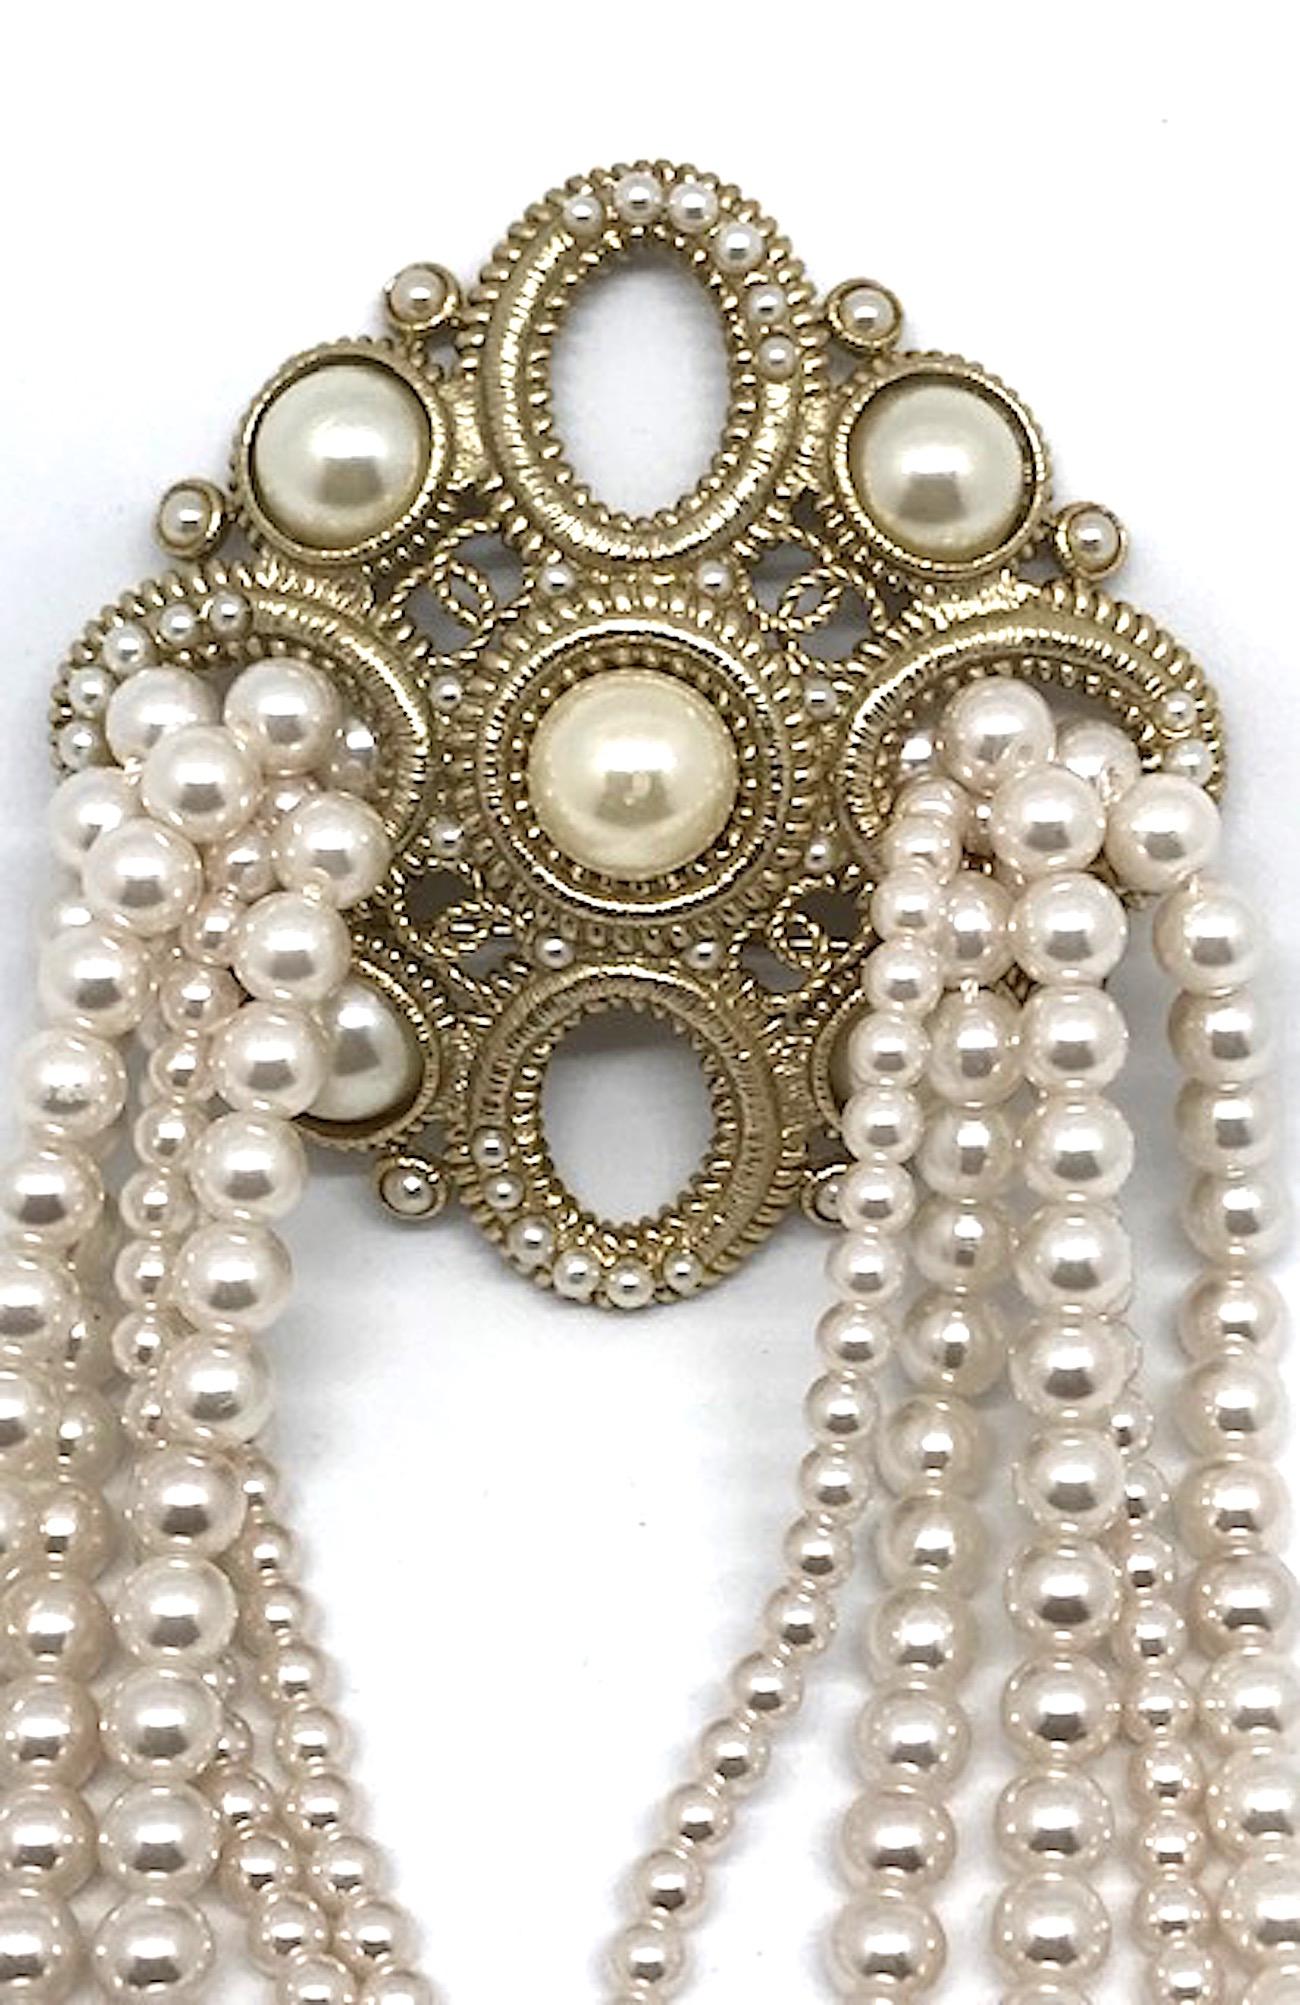 Women's or Men's Chanel Dramatic & Large Medallion with Pearl Fringe Pin, 2015 Collection